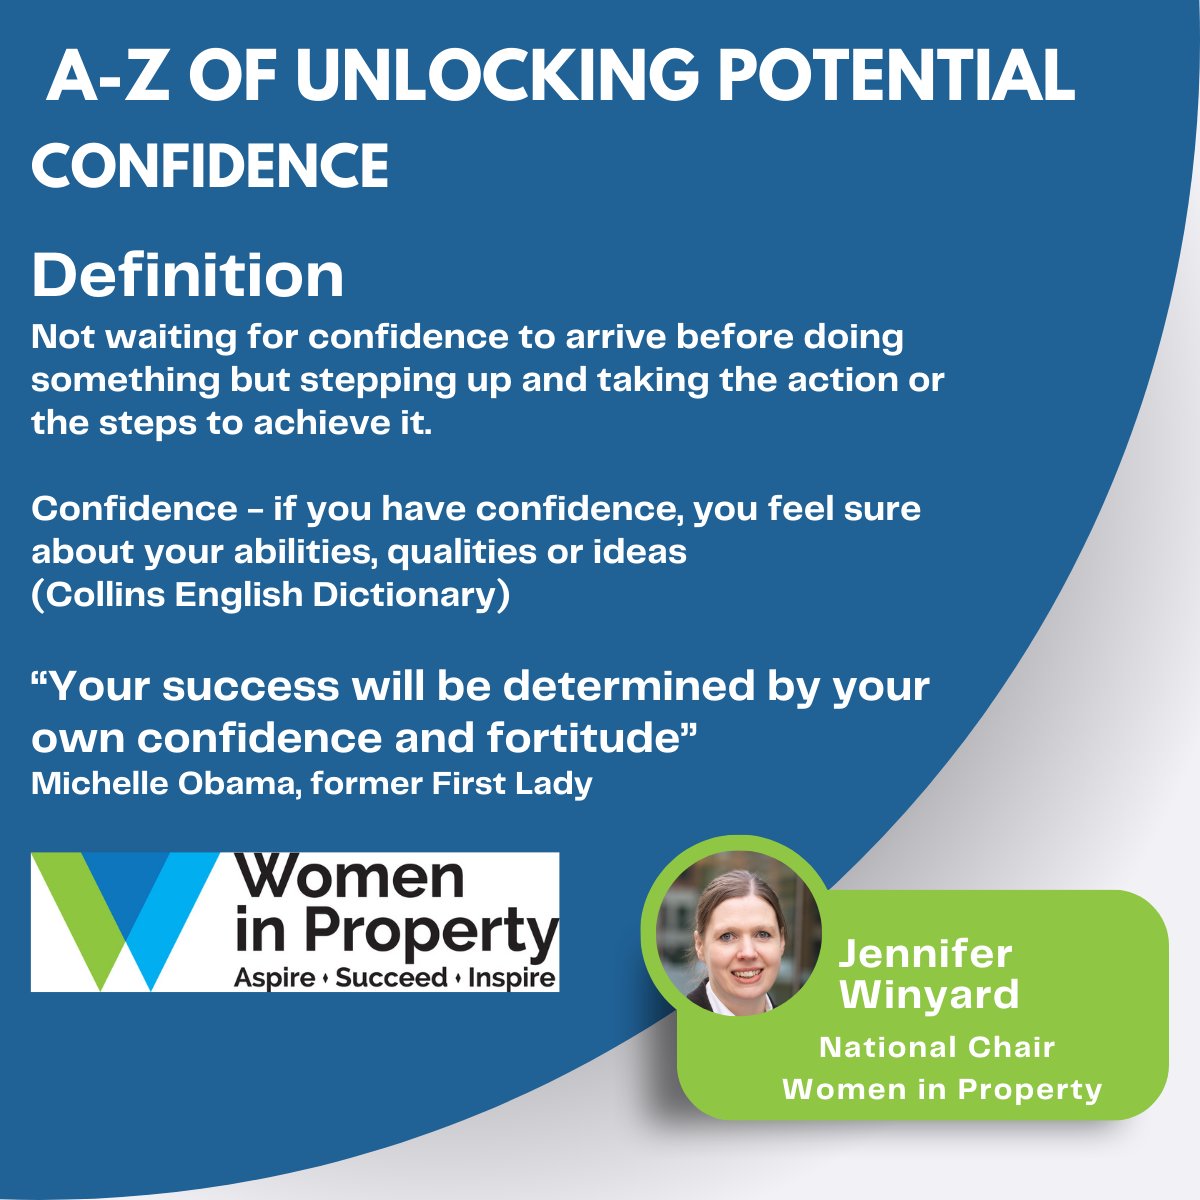 Step up and take action! Today we're on C of @JenniferWInyard A-Z of Unlocking Potential. C is for Confidence.